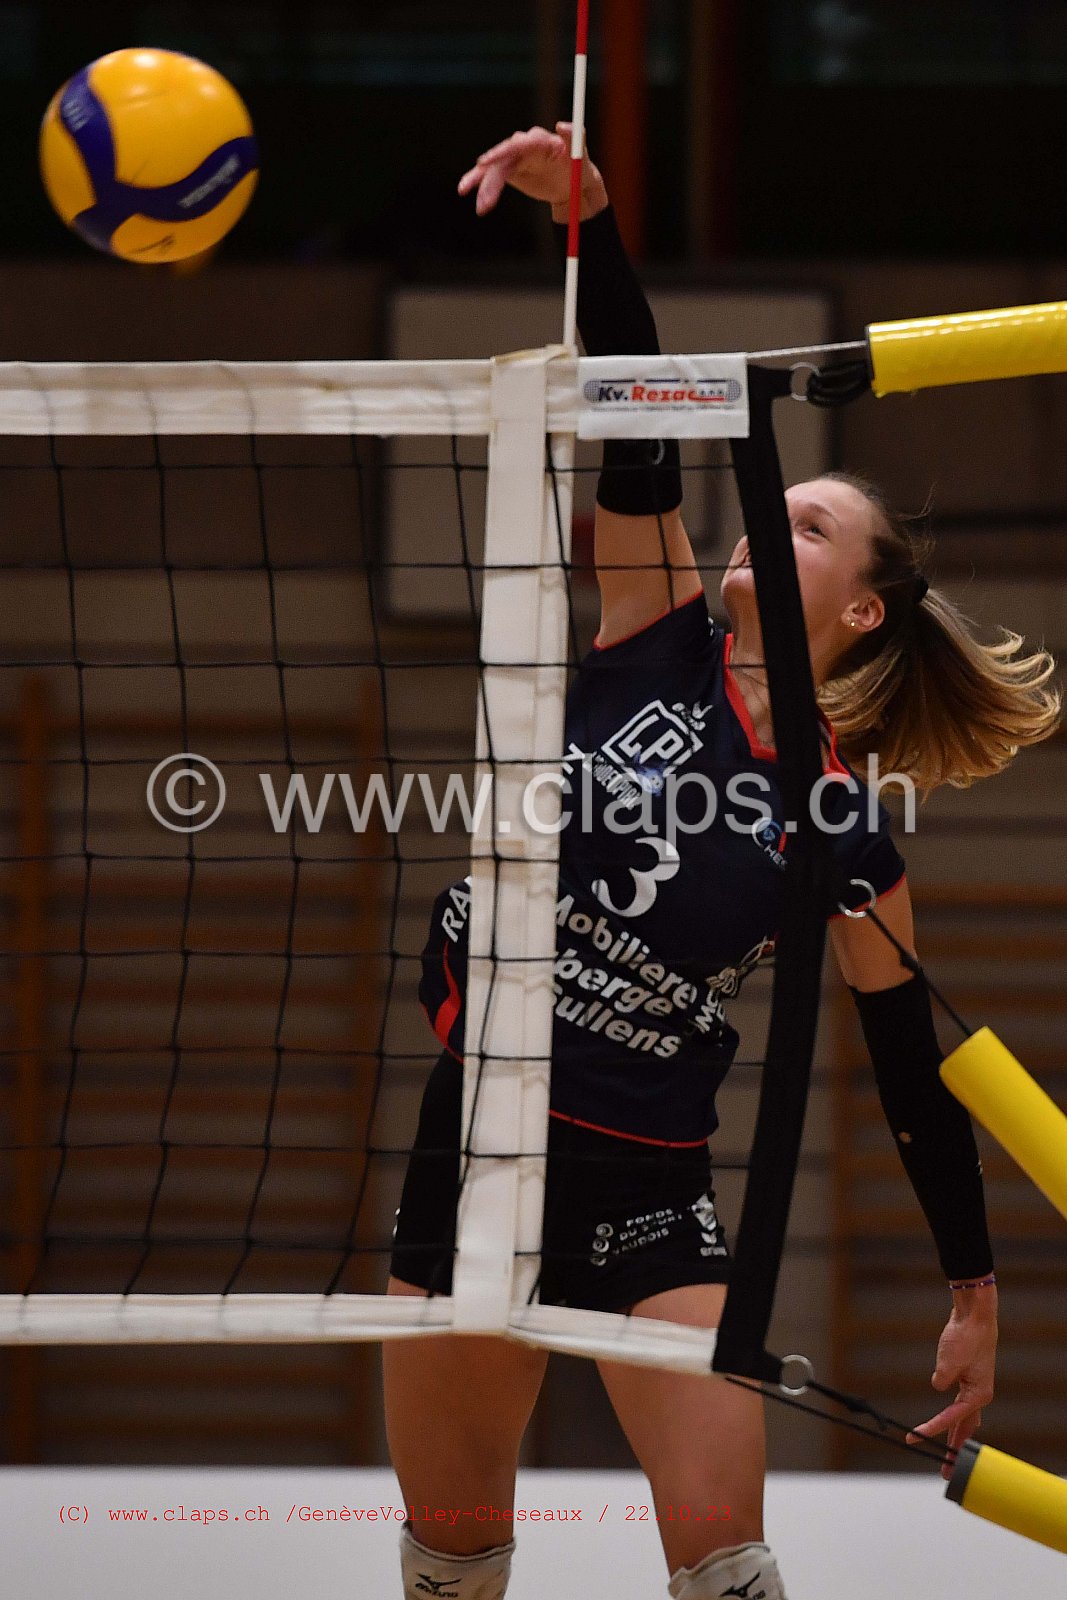 20231028_GveVolley_Cheseaux